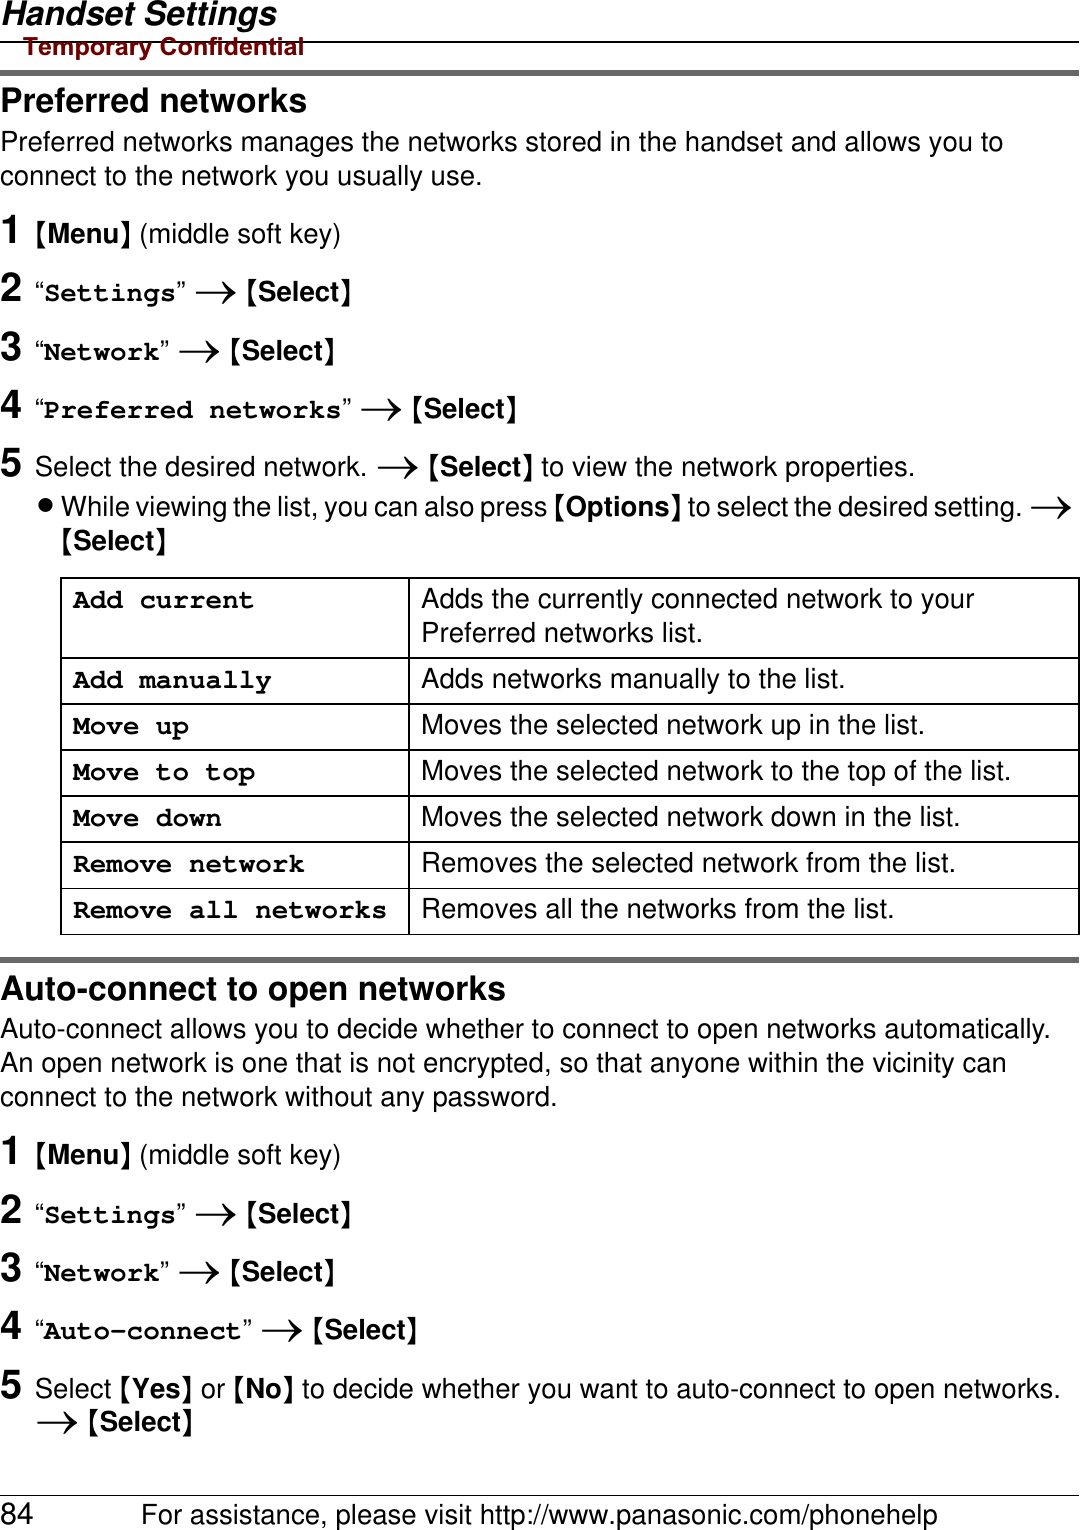 Handset Settings84 For assistance, please visit http://www.panasonic.com/phonehelpPreferred networksPreferred networks manages the networks stored in the handset and allows you to connect to the network you usually use.1{Menu} (middle soft key)2“Settings” i {Select}3“Network” i {Select}4“Preferred networks” i {Select}5Select the desired network. i {Select} to view the network properties.LWhile viewing the list, you can also press {Options} to select the desired setting. i {Select}Auto-connect to open networksAuto-connect allows you to decide whether to connect to open networks automatically.An open network is one that is not encrypted, so that anyone within the vicinity can connect to the network without any password.1{Menu} (middle soft key)2“Settings” i {Select}3“Network” i {Select}4“Auto-connect” i {Select}5Select {Yes} or {No} to decide whether you want to auto-connect to open networks. i {Select}Add current Adds the currently connected network to your Preferred networks list.Add manually Adds networks manually to the list.Move up Moves the selected network up in the list.Move to top Moves the selected network to the top of the list.Move down Moves the selected network down in the list.Remove network Removes the selected network from the list.Remove all networks Removes all the networks from the list.Temporary Confidential